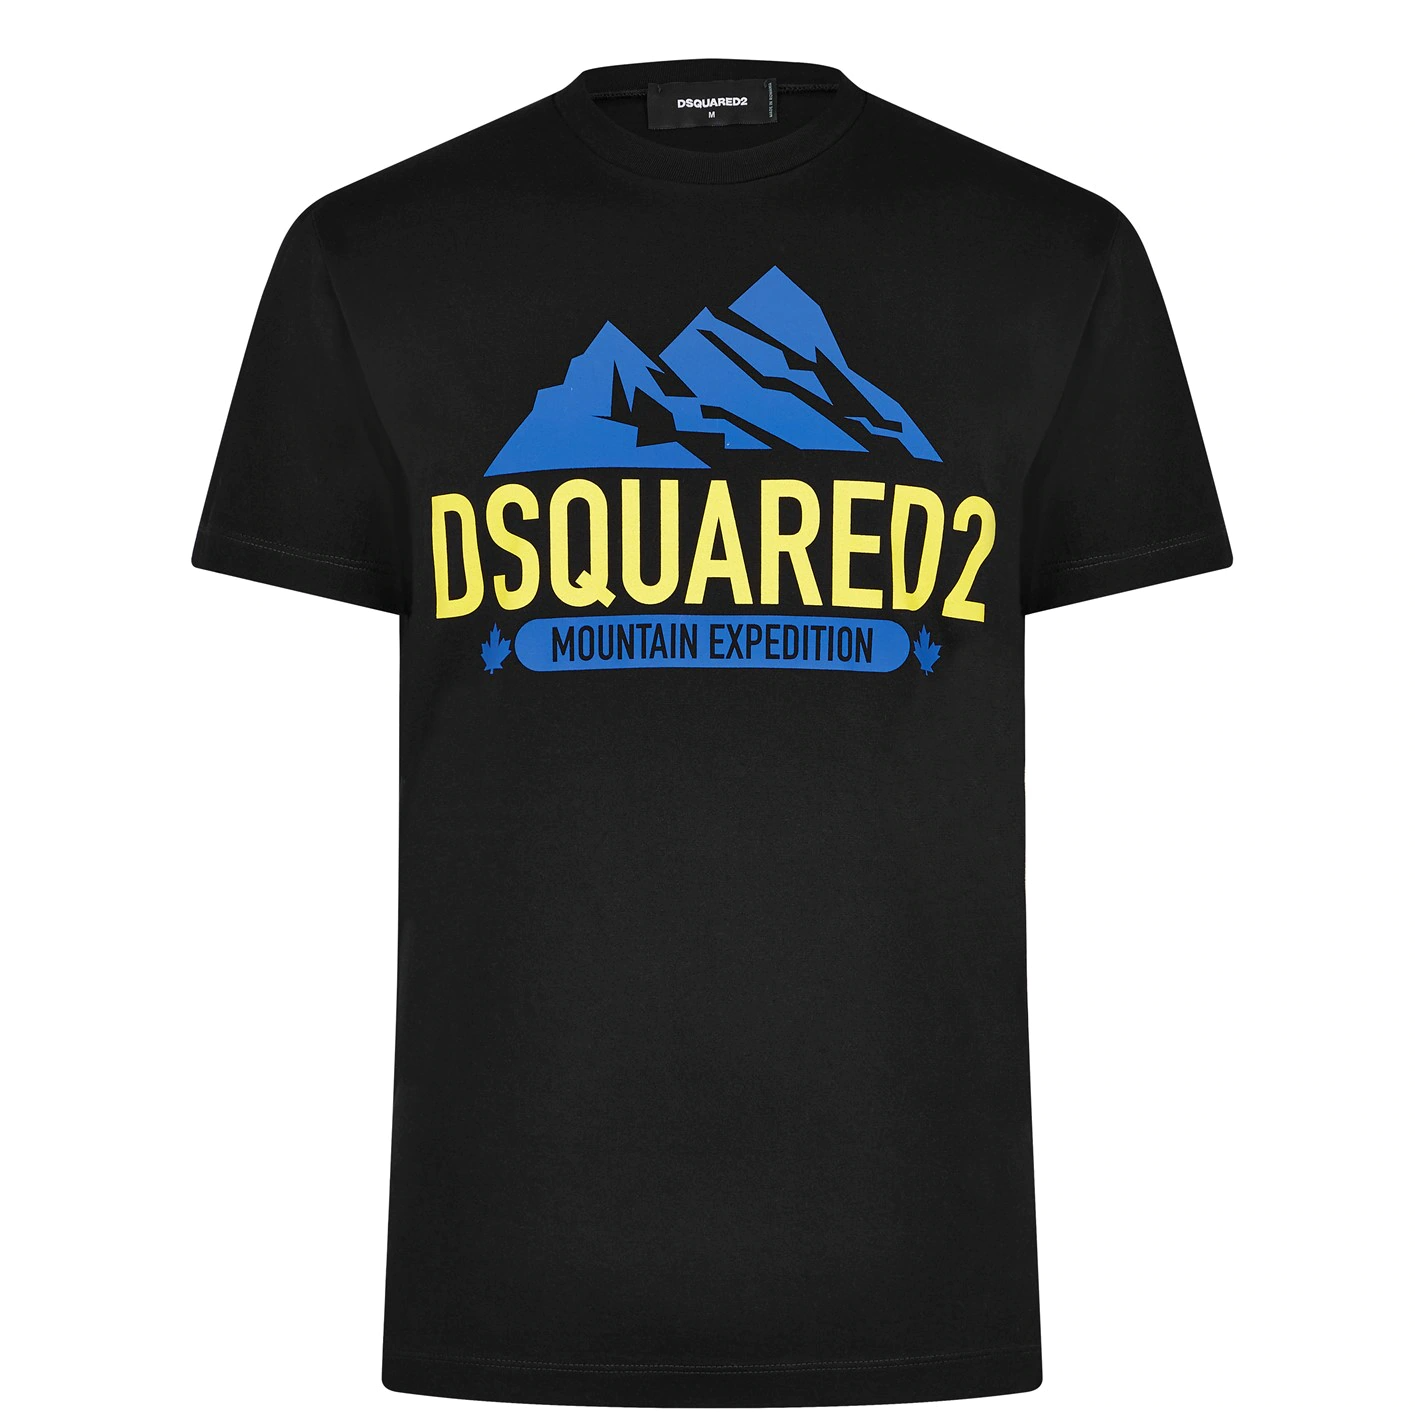 DSquared2 Expedition T-Shirt Black